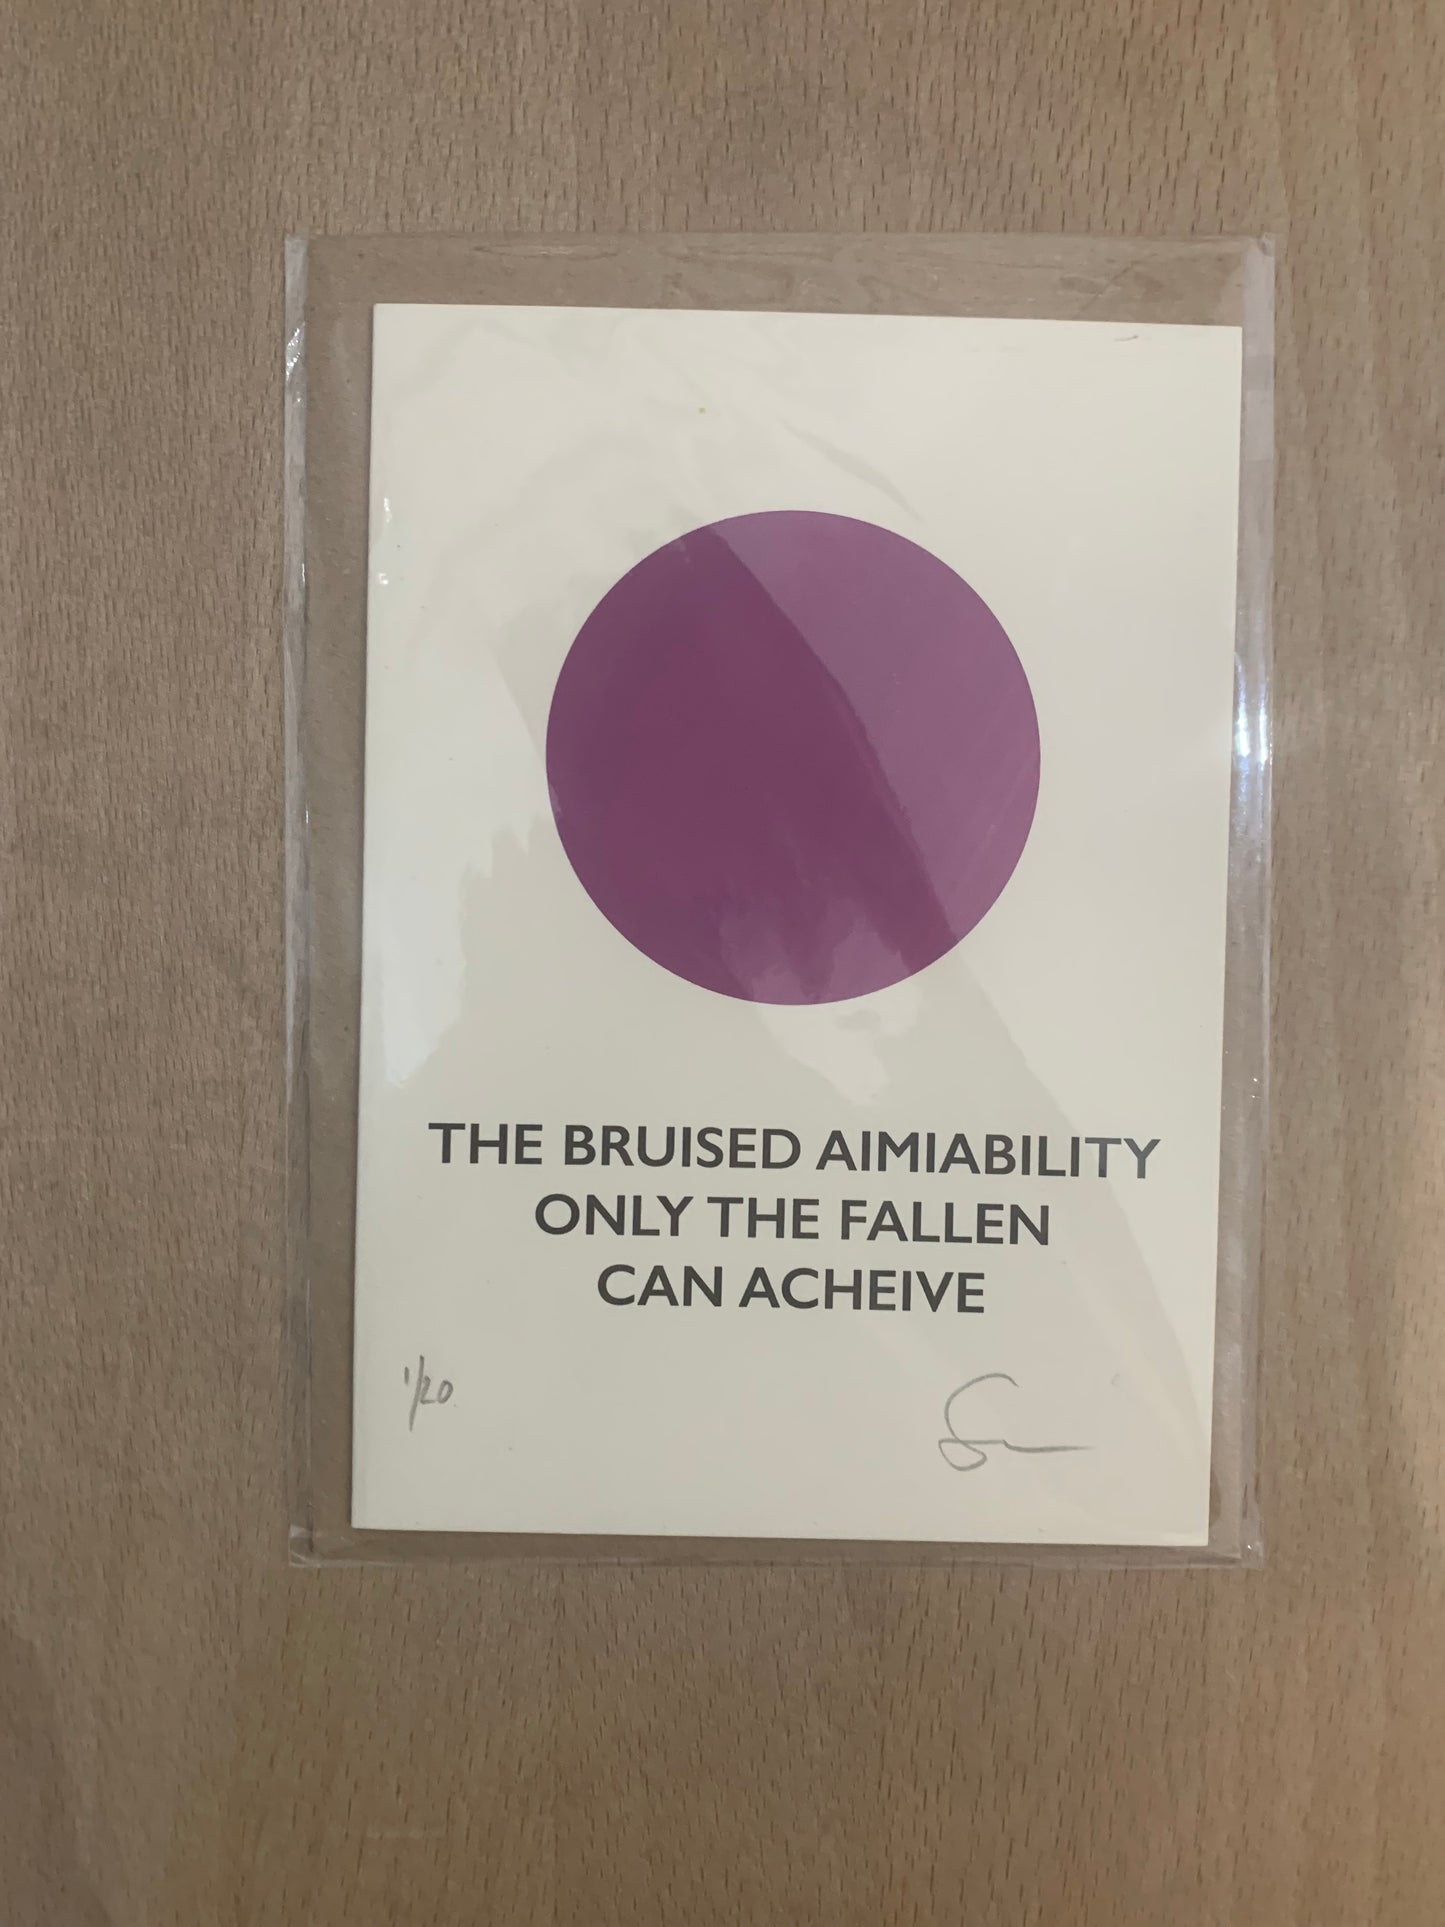 CMPH "The bruised amiability only the fallen can achieve" parting shot card